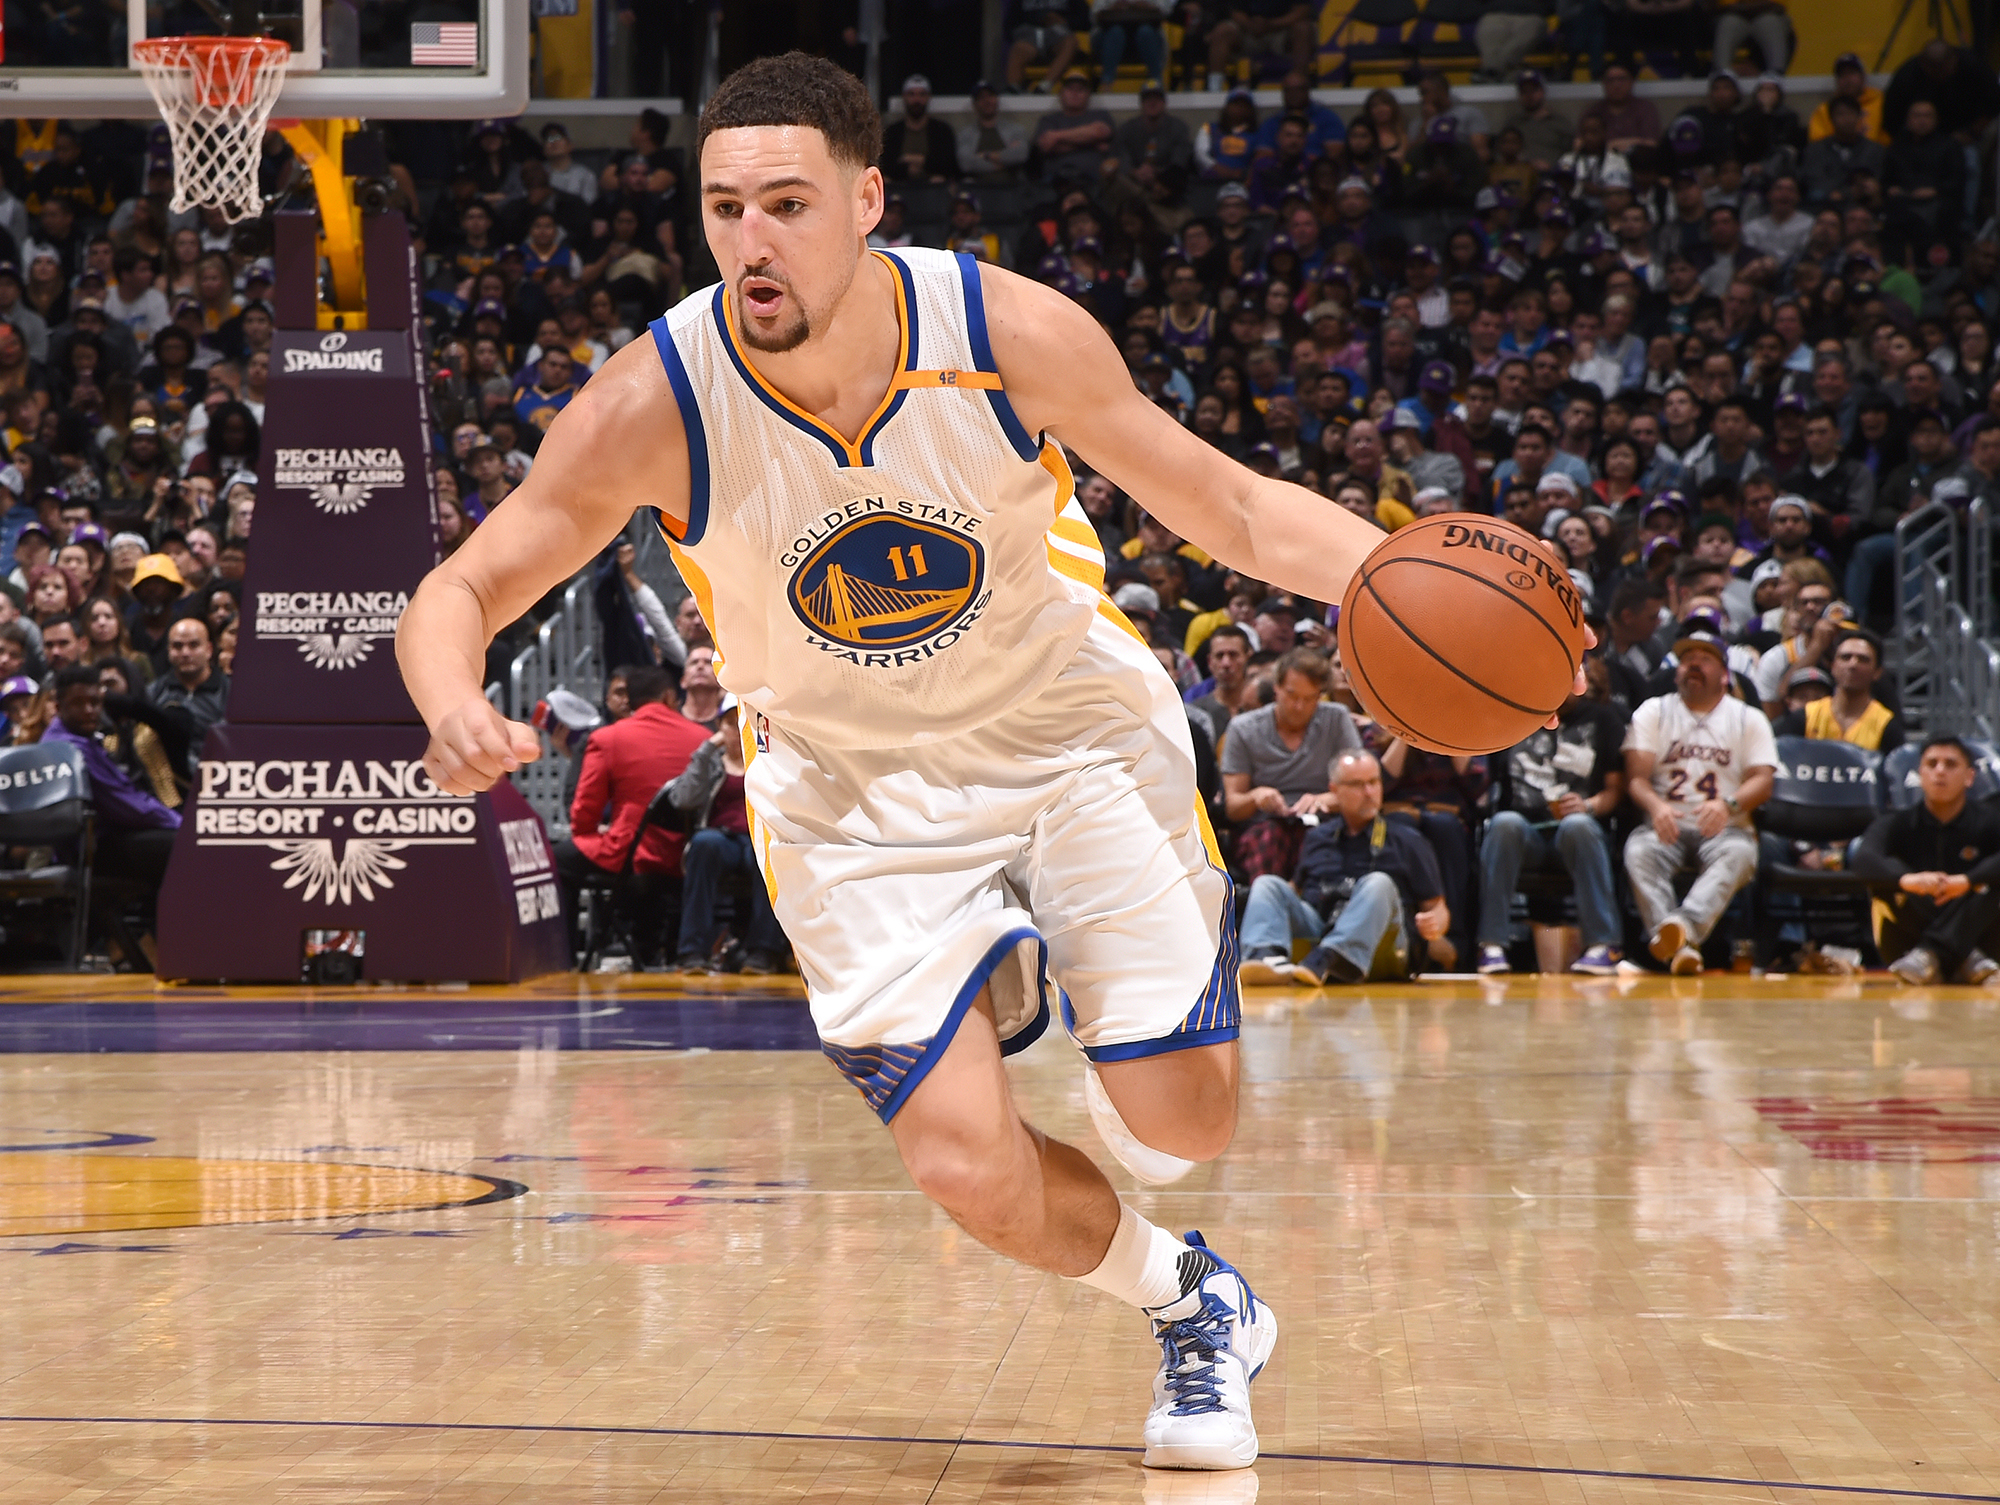 Klay Thompson #11 of the Golden State Warriors drives to the basket against the Los Angeles Lakers on November 25, 2016 at STAPLES Center in Los Angeles, California. NOTE TO USER: User expressly acknowledges and agrees that, by downloading and/or using this Photograph, user is consenting to the terms and conditions of the Getty Images License Agreement. Mandatory Copyright Notice: Copyright 2016 NBAE (Photo by Andrew D. Bernstein/NBAE via Getty Images) (Andrew D. Bernstein&mdash;NBAE/Getty Images)